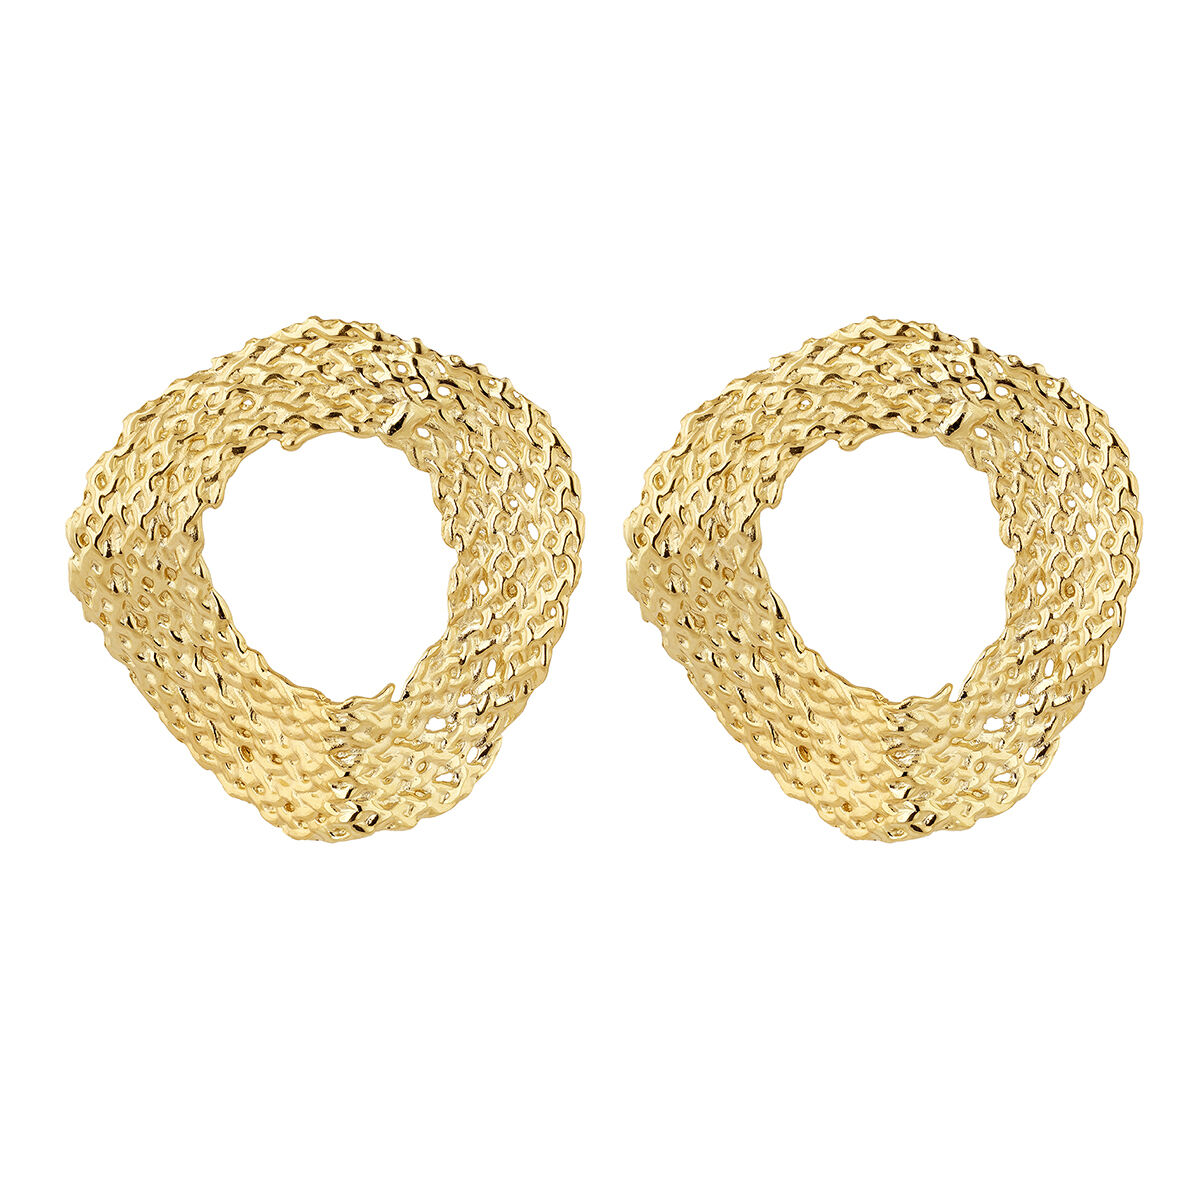 Large gold plated wicker circle earrings , J04417-02, hi-res